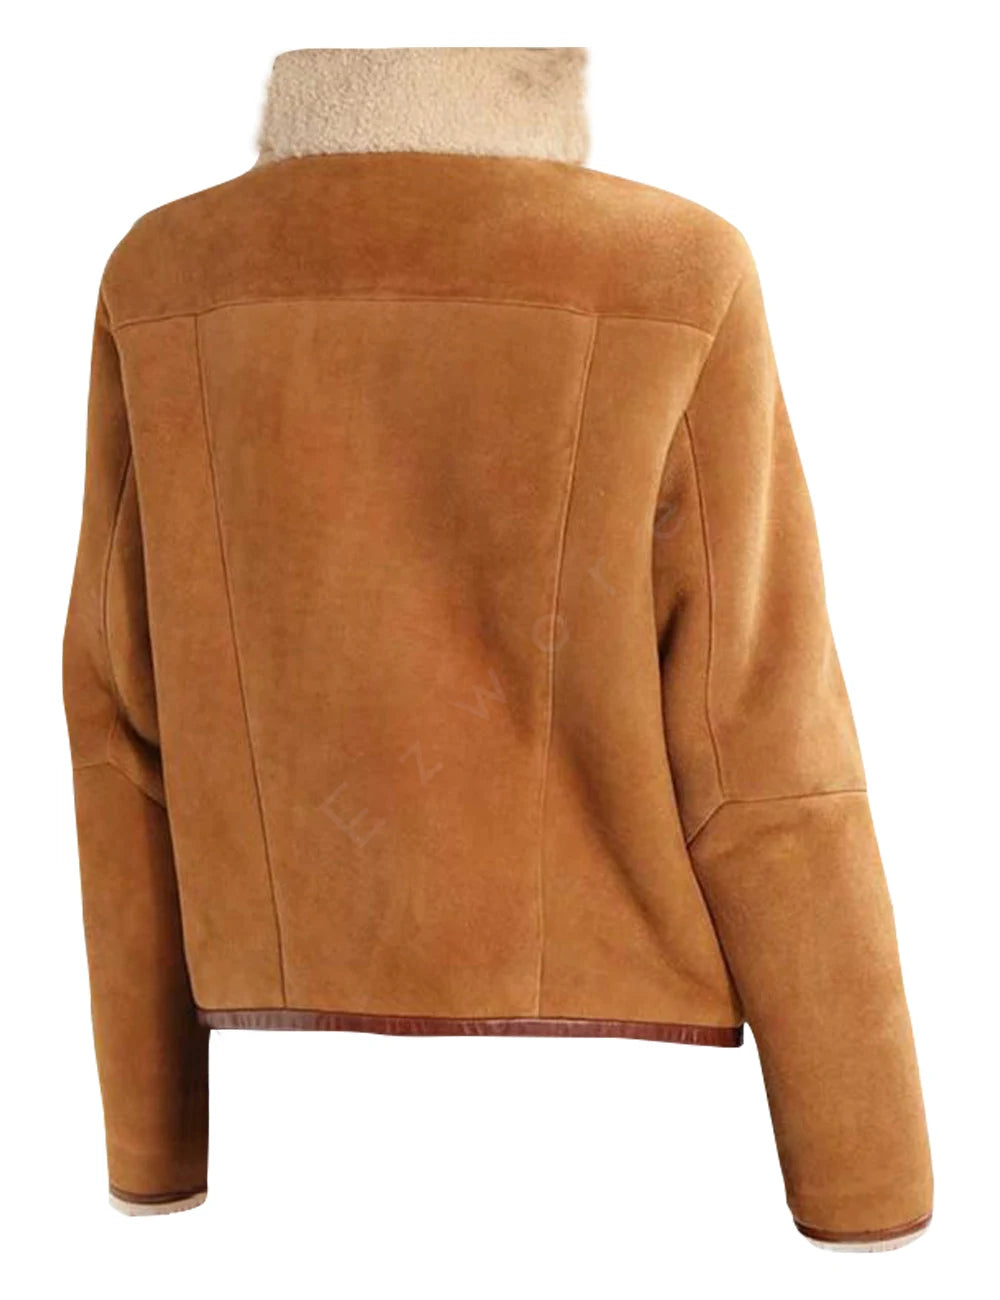 Womens Shearling Brown Suede Leather Jacket